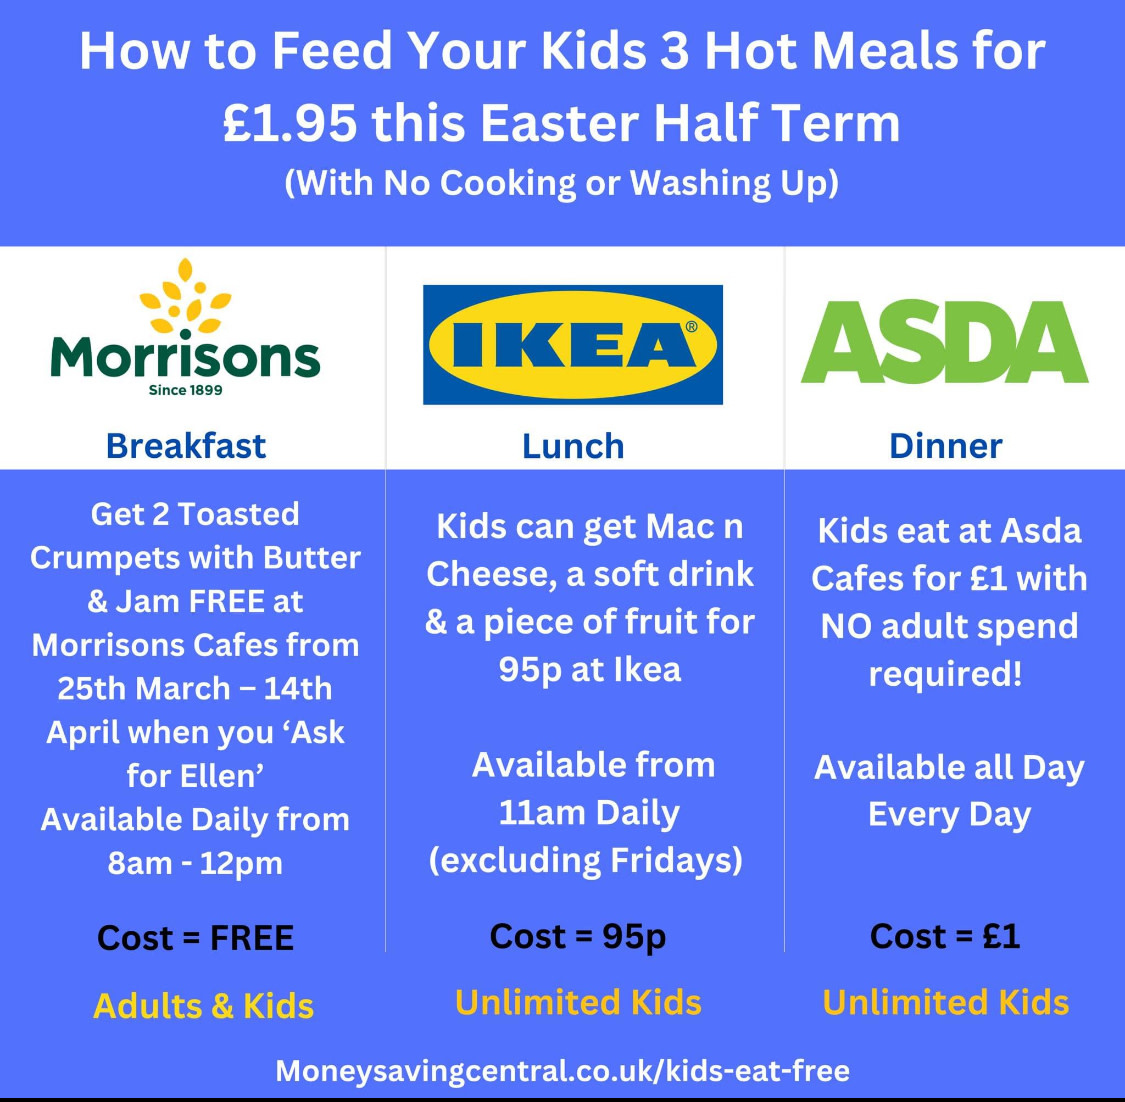 It's almost time to embrace the Easter Holidays 🐣 Check out @MoneySavingCen helpful lists of venues offering more affordable or free options for children to east for free over the holidays. #kidseatfree #moneysaving #schoolholidays